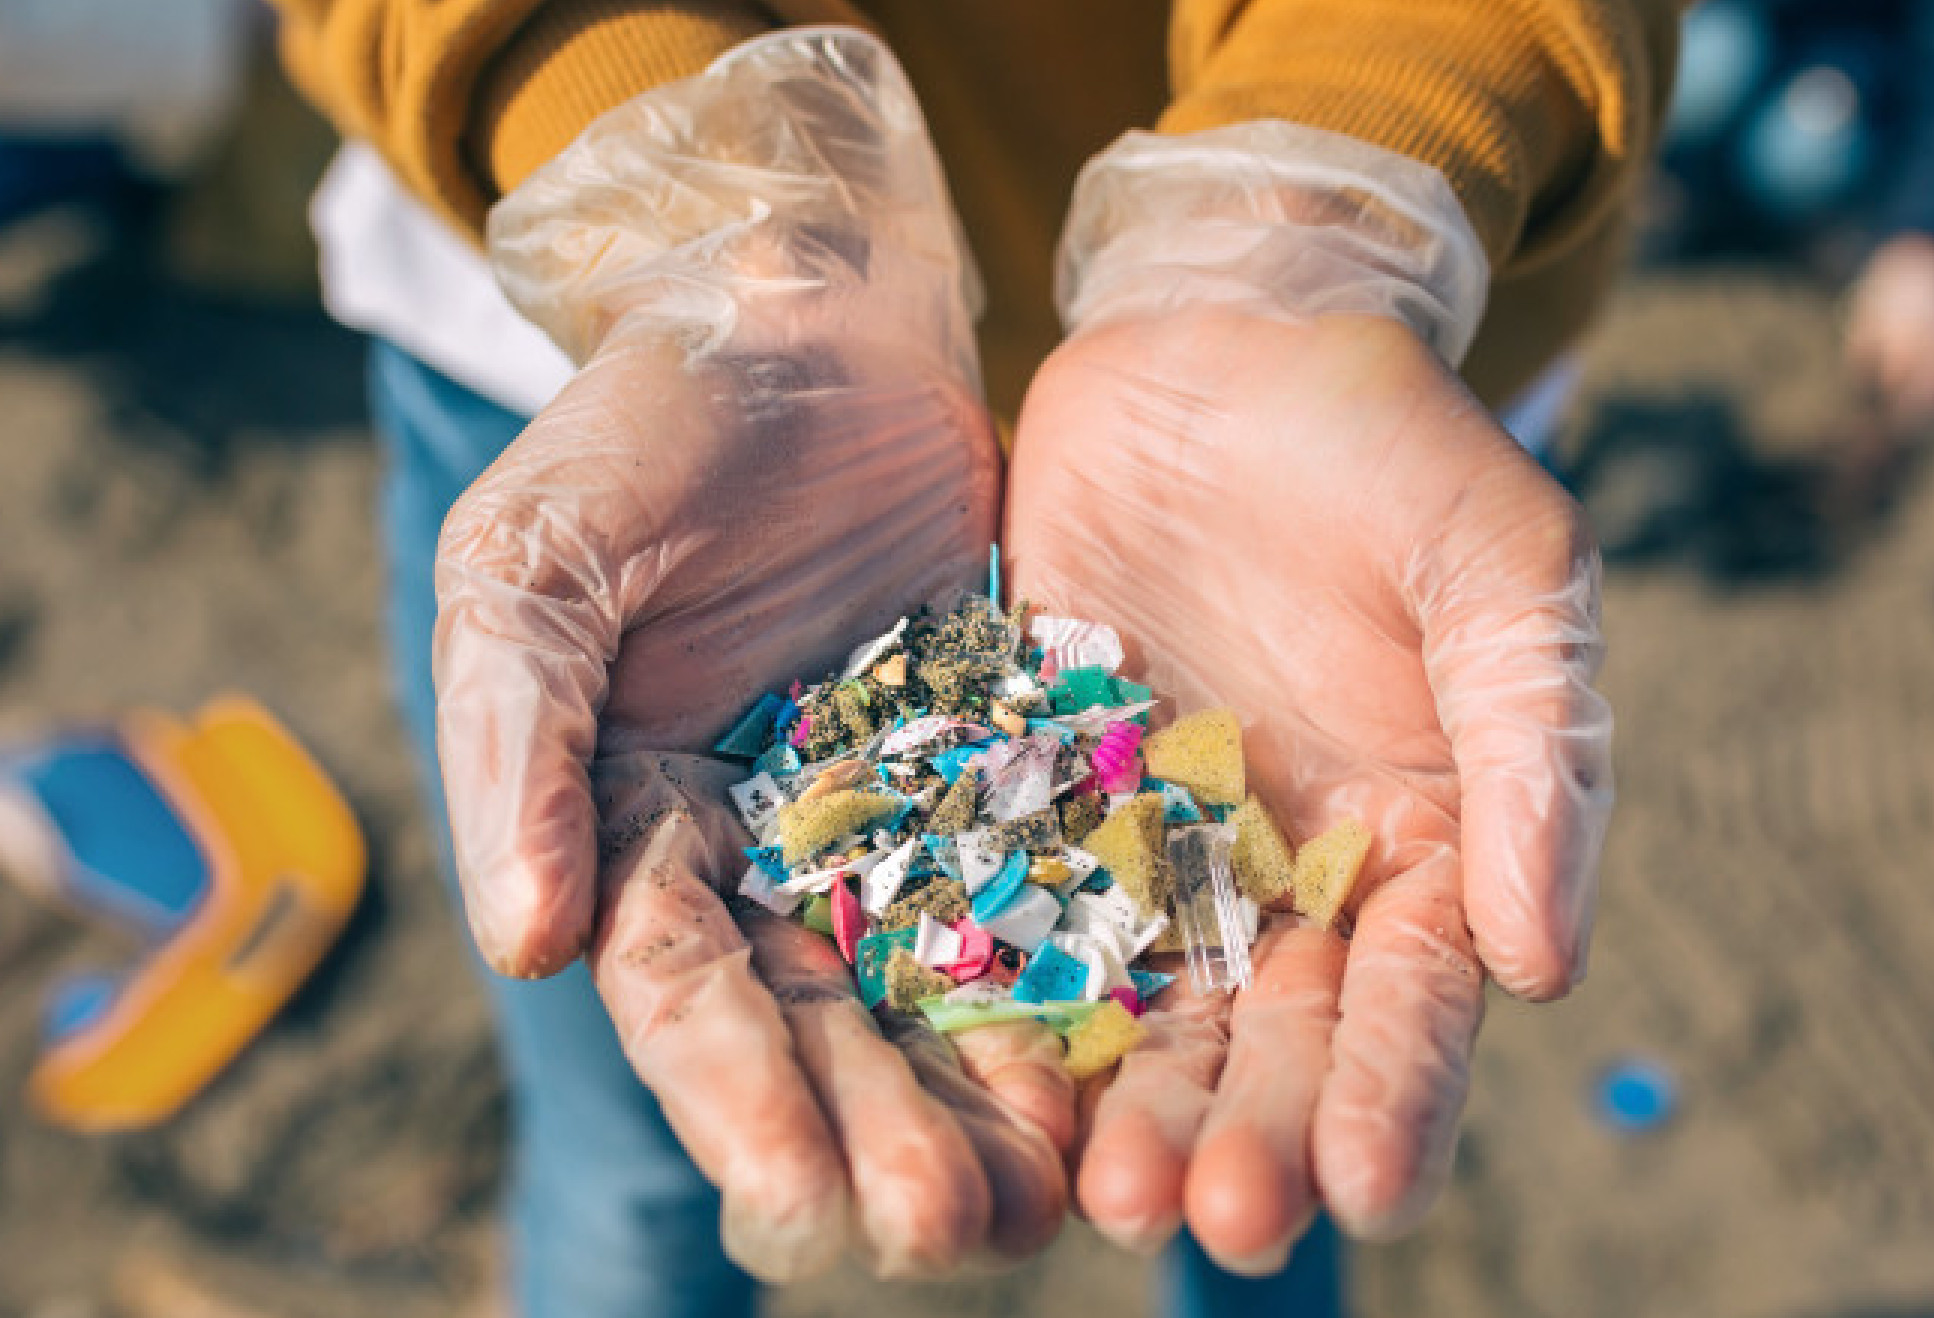 Microplastics collected on a beach